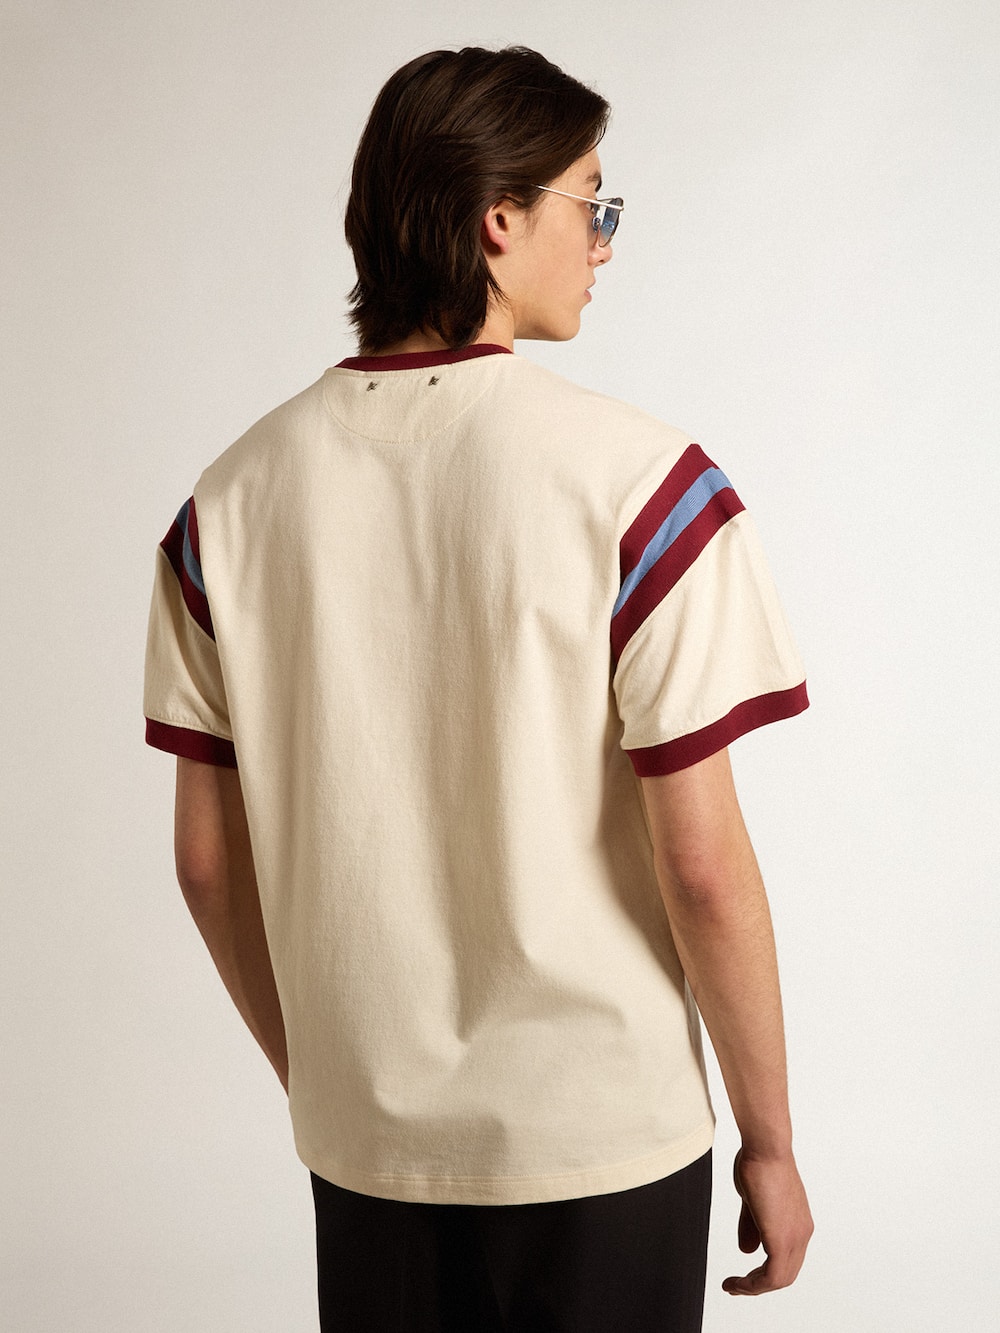 Golden Goose - Men’s white T-shirt with burgundy lettering on the front in 